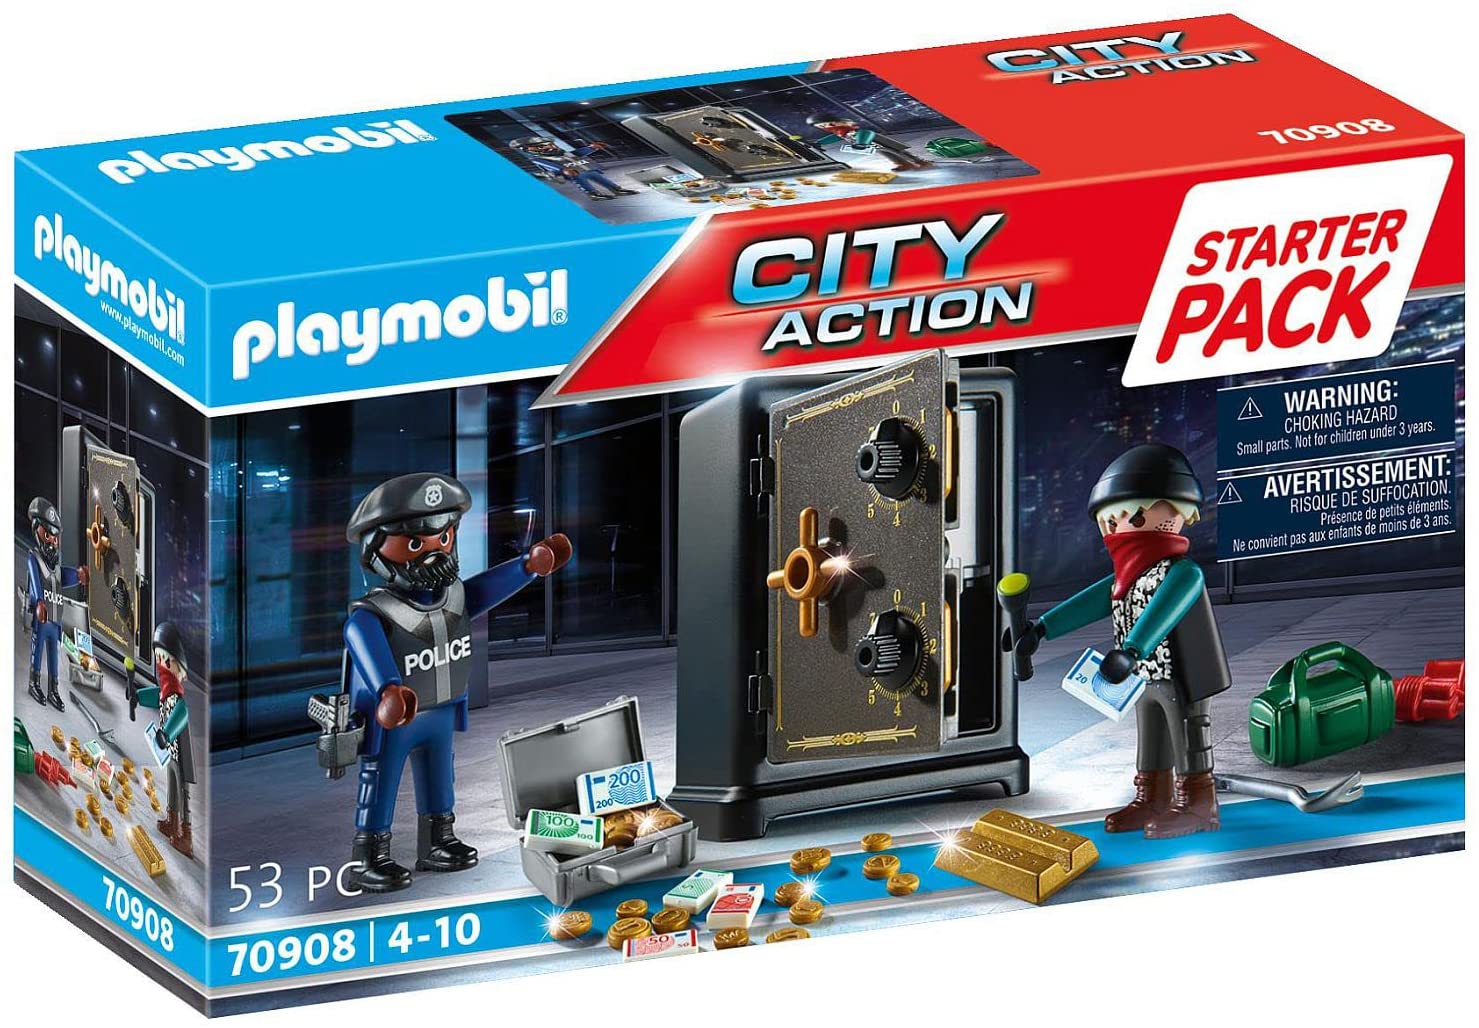 PLAYMOBIL City Action 70908 Starter Pack Safe Cracker Toy for Children from 4 Years